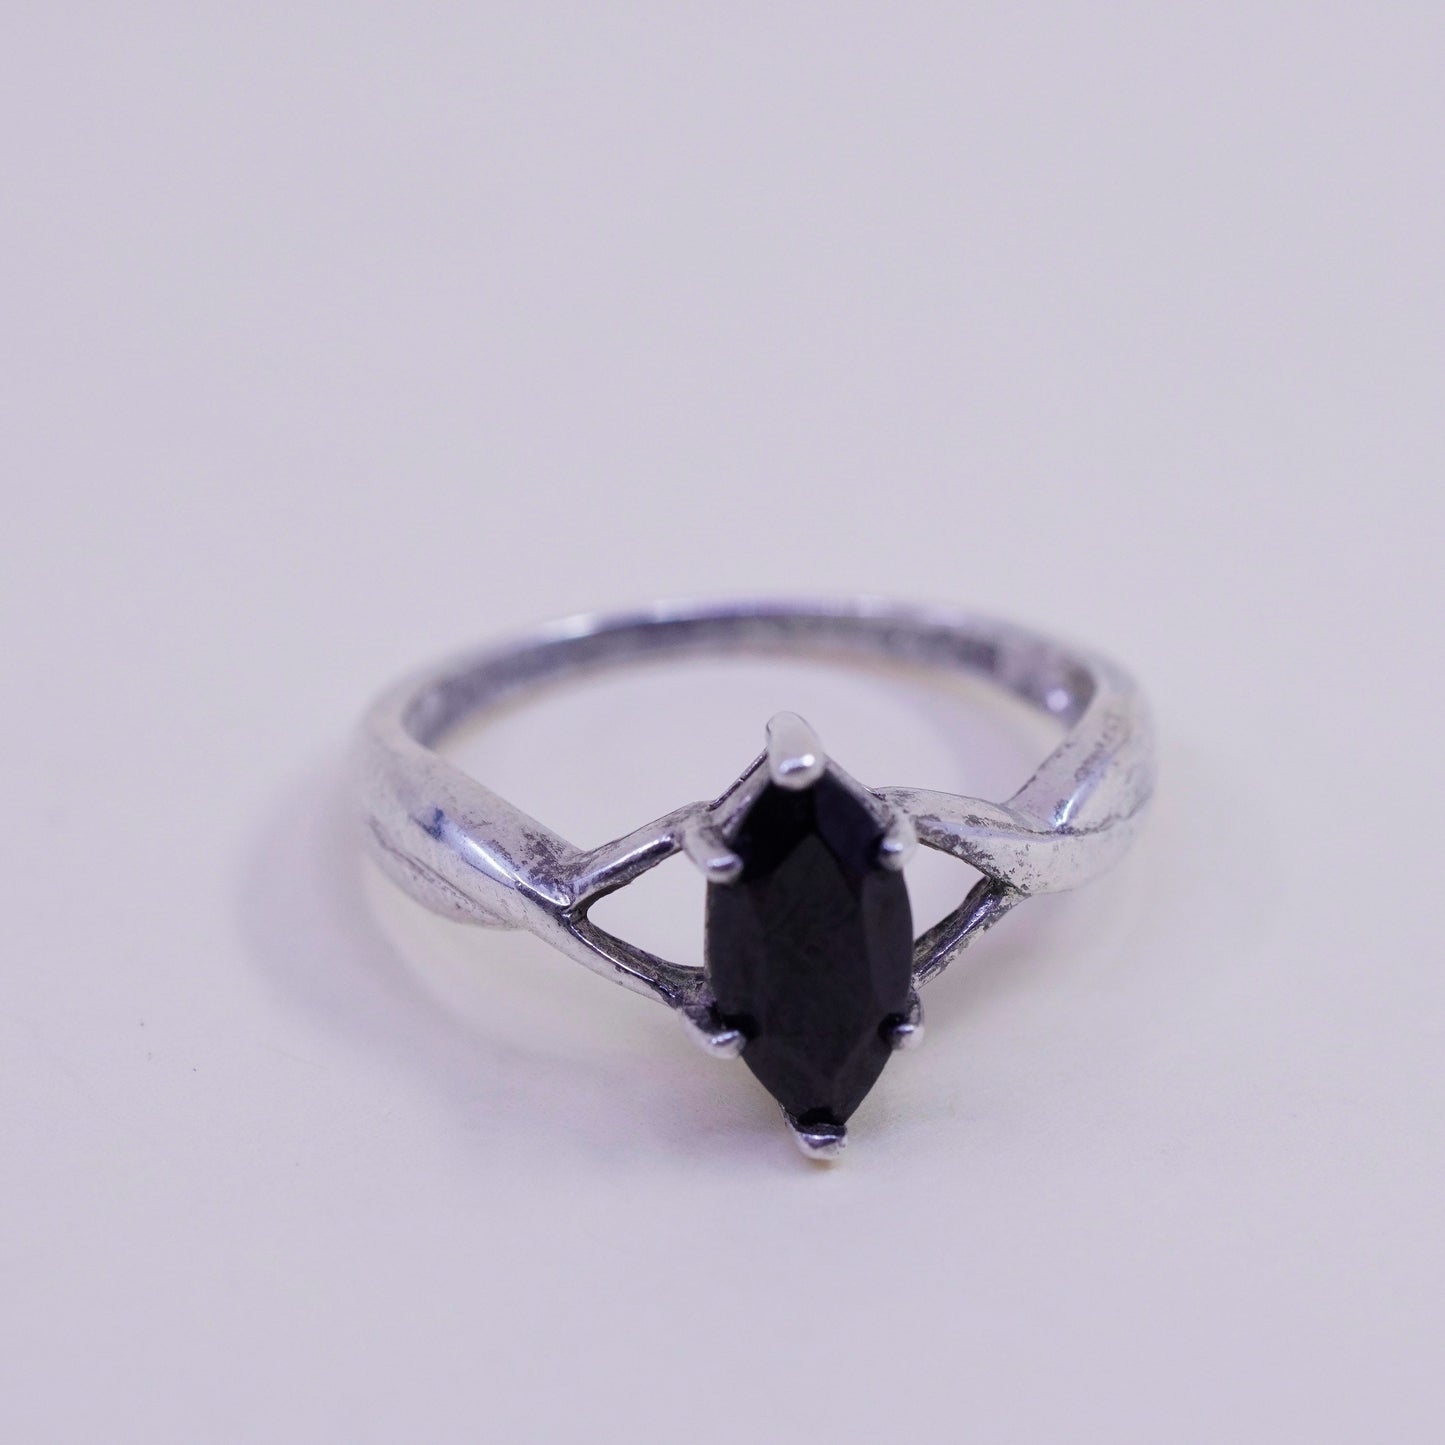 Size 7.25, Vintage sterling silver 925 ring with wavy obsidian